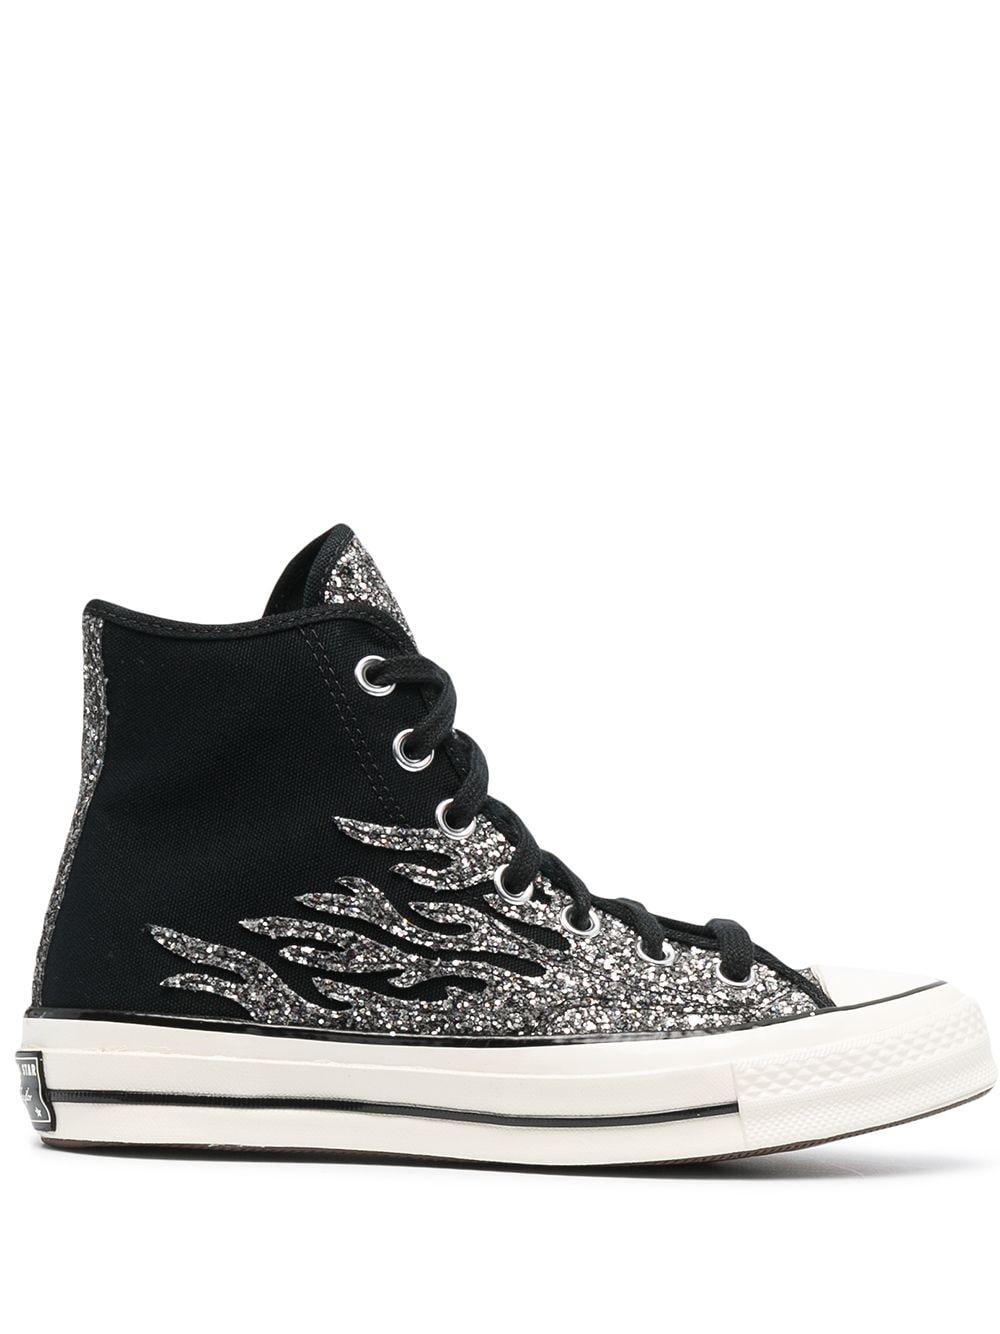 Converse Canvas Glitter Flame Chuck Taylor All-star Sneakers in Black | Lyst